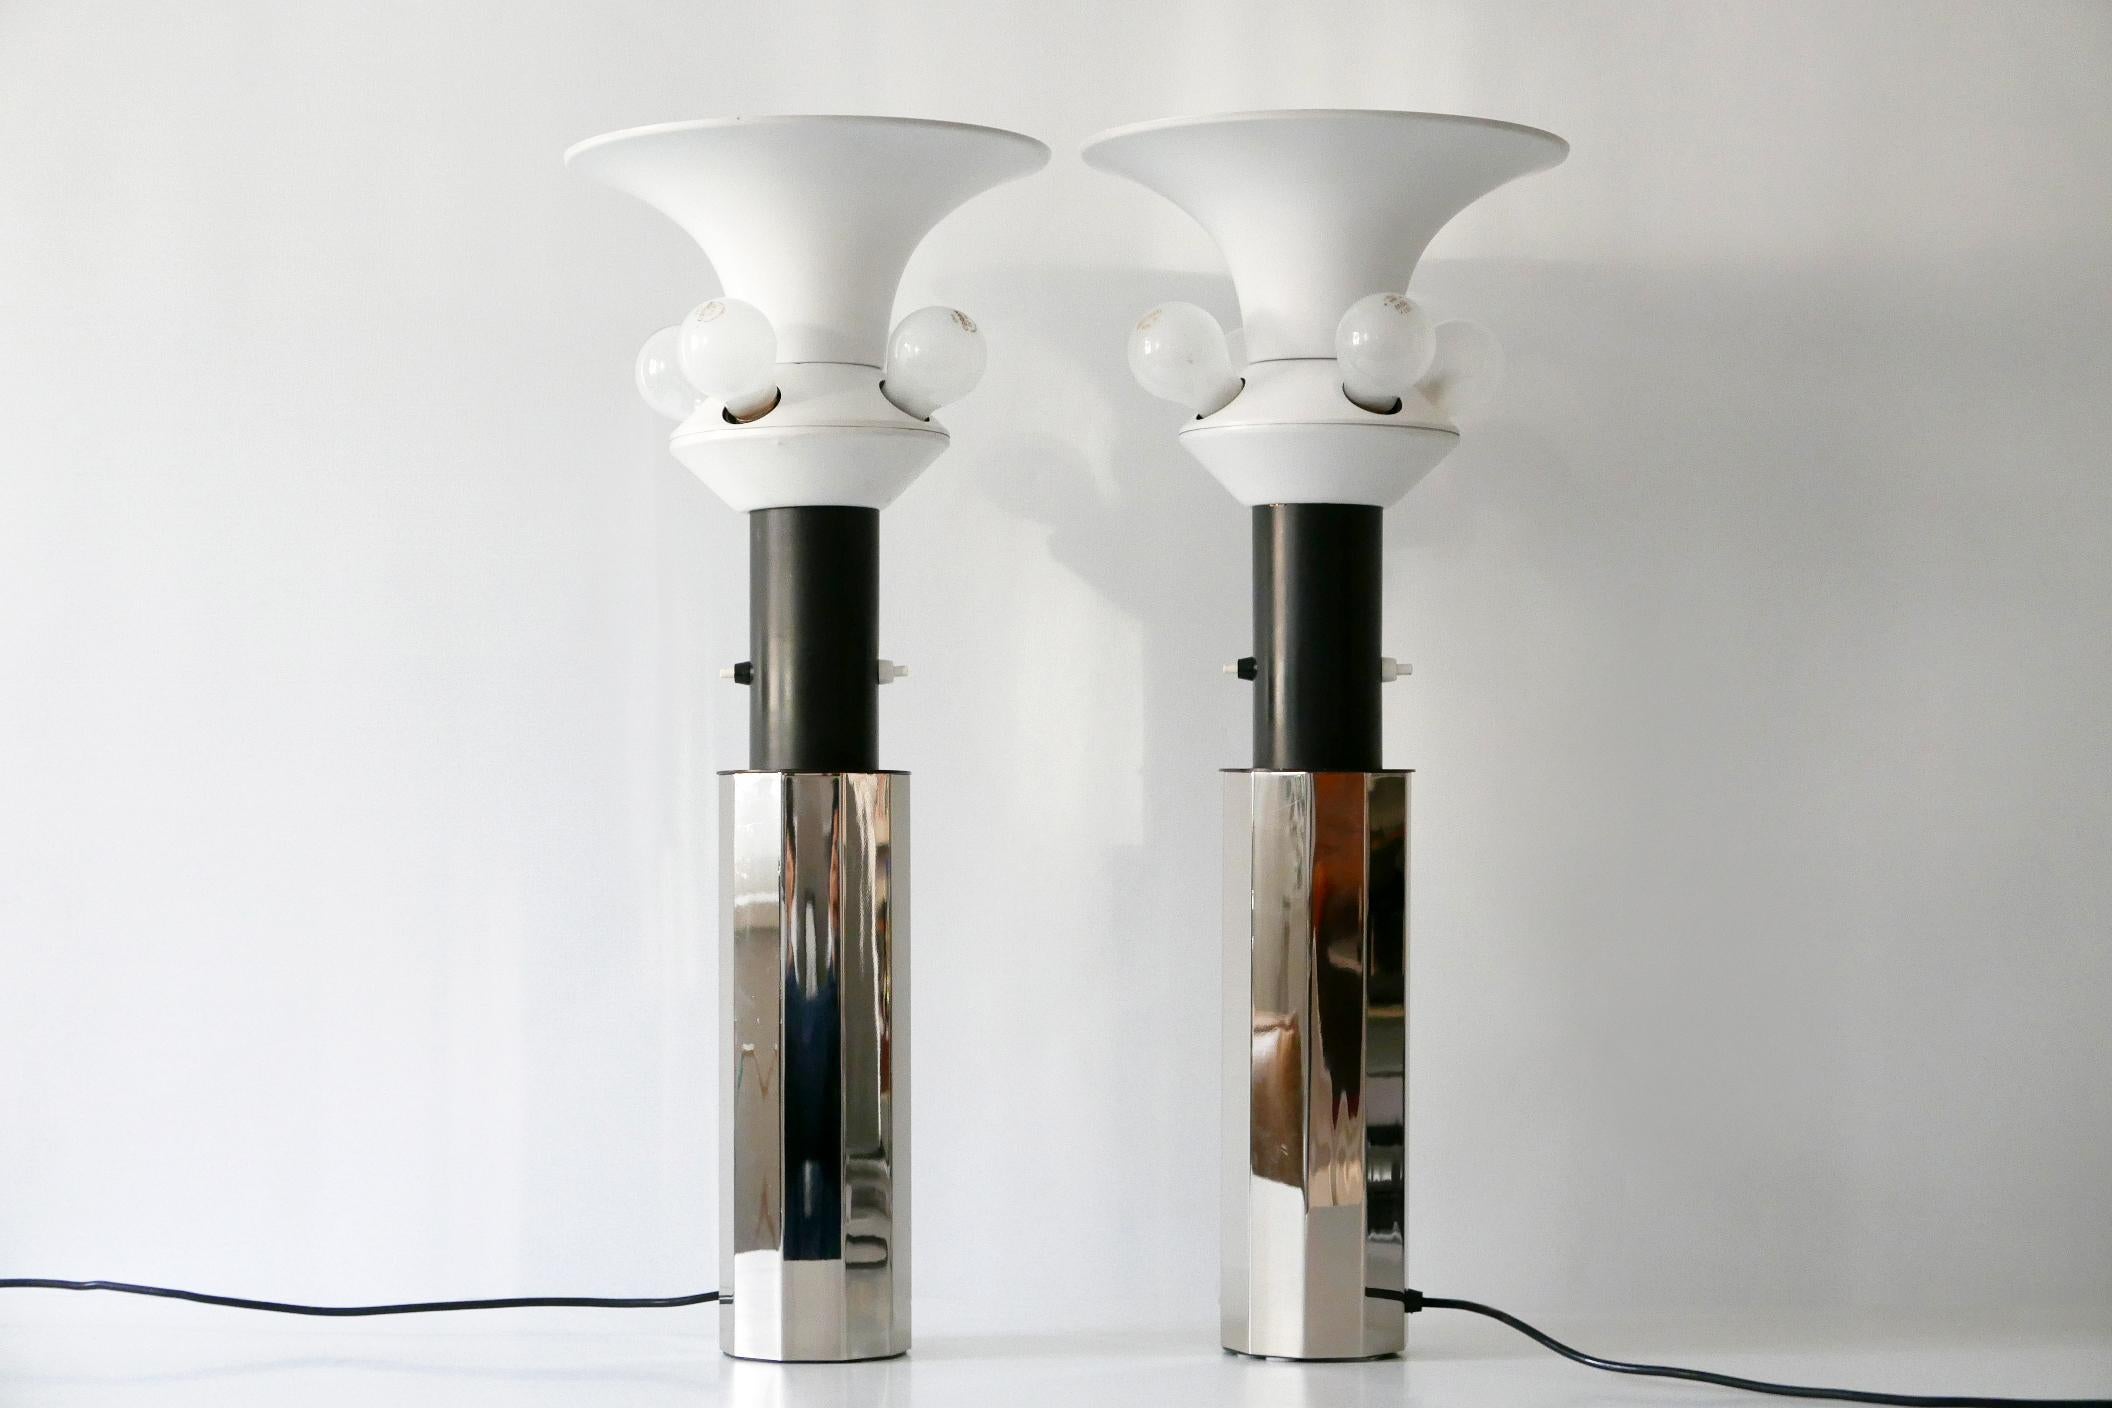 Mid-20th Century Set of Two Huge, 5-Flamed Midcentury Decagonal Chrome Table Lamps 1960s, Germany For Sale